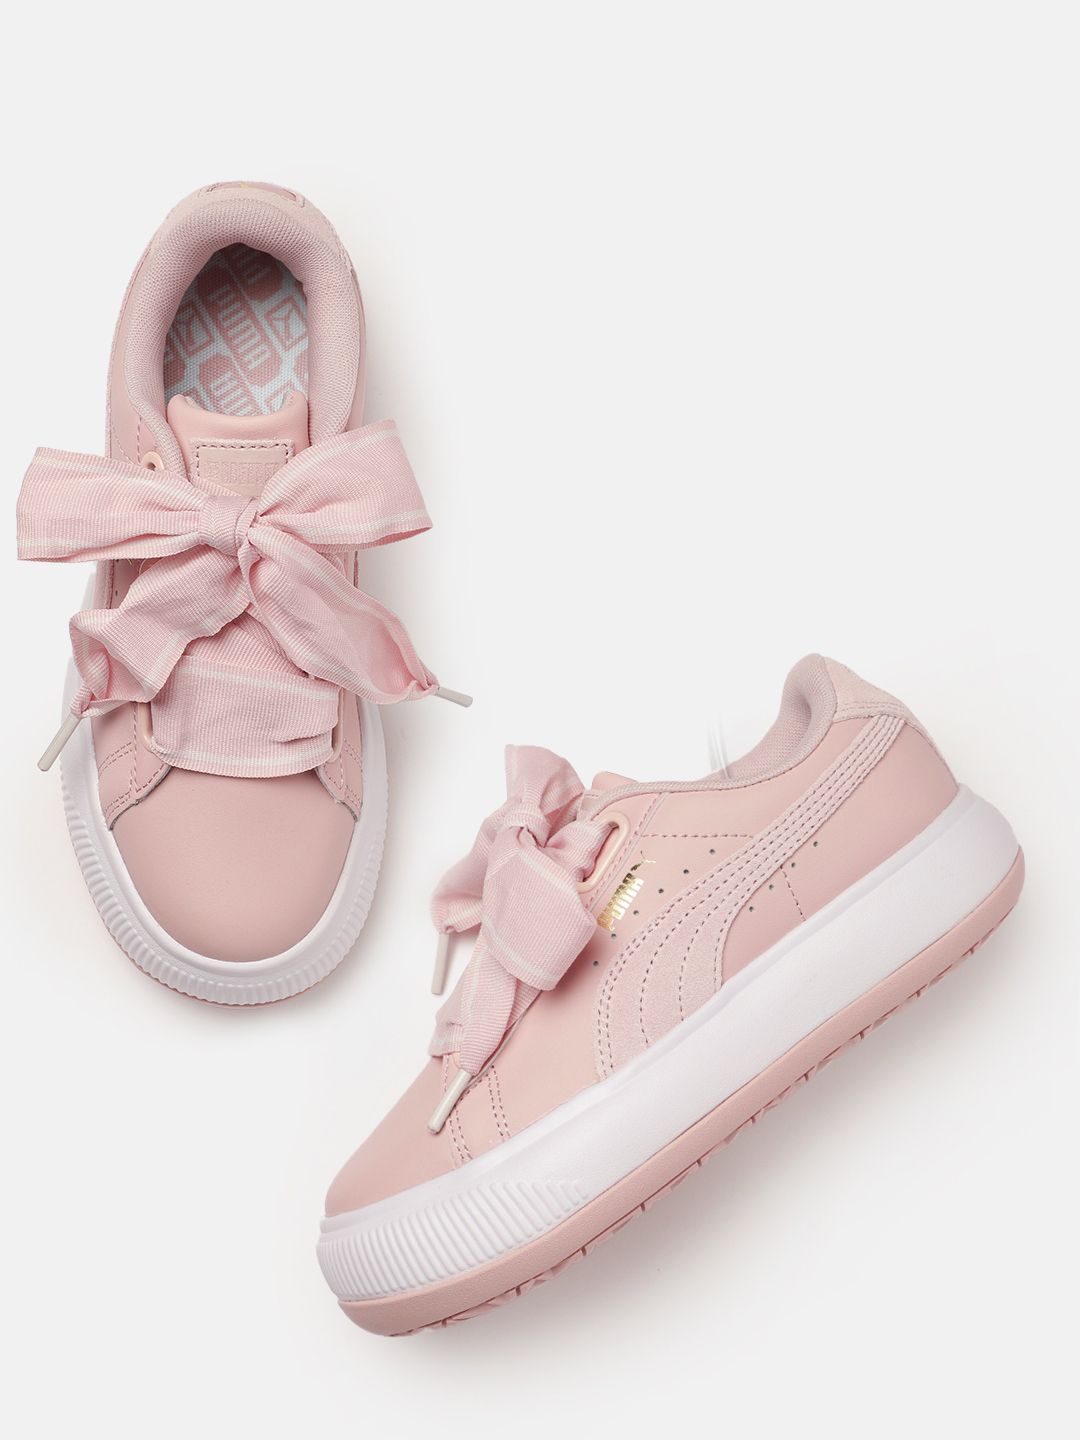 Puma Women Pink Mayu Heart Leather Sneakers Price in India